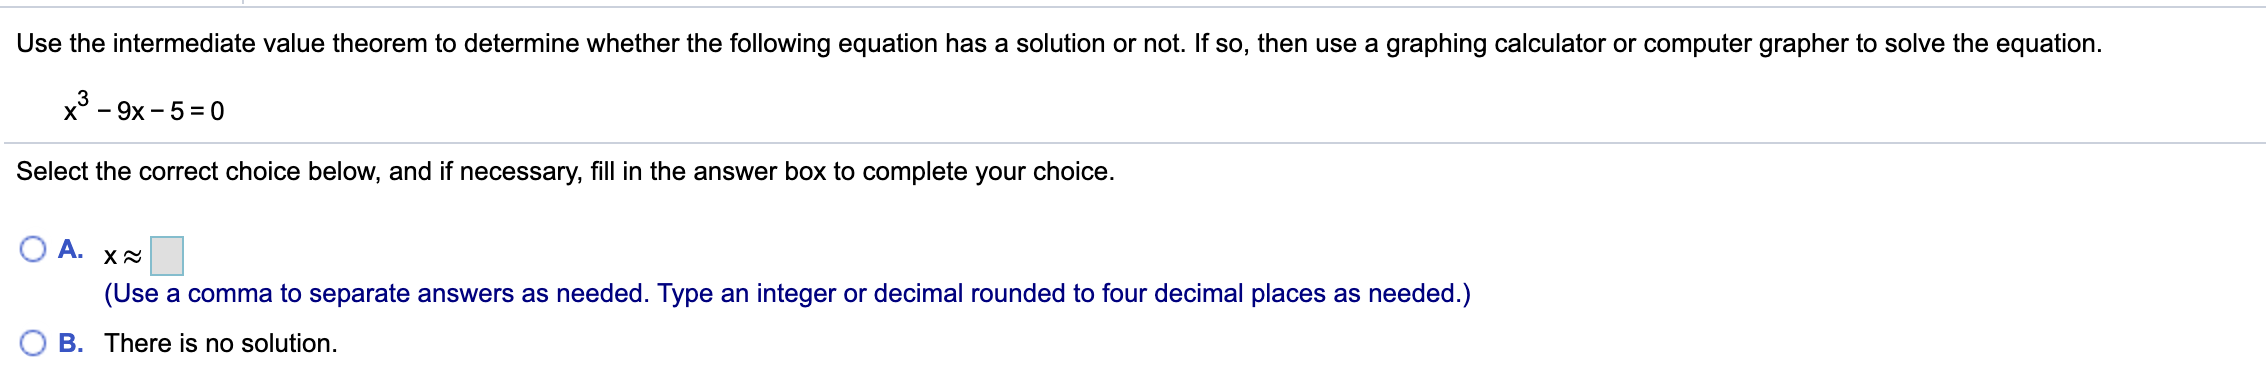 Use the intermediate value theorem to determine whether the following equation has a solution or not. If so, then use a graphing calculator or computer grapher to solve the equation.
x° - 9x - 5= 0
Select the correct choice below, and if necessary, fill in the answer box to complete your choice.
A.
(Use a comma to separate answers as needed. Type an integer or decimal rounded to four decimal places as needed.)
B. There is no solution.
